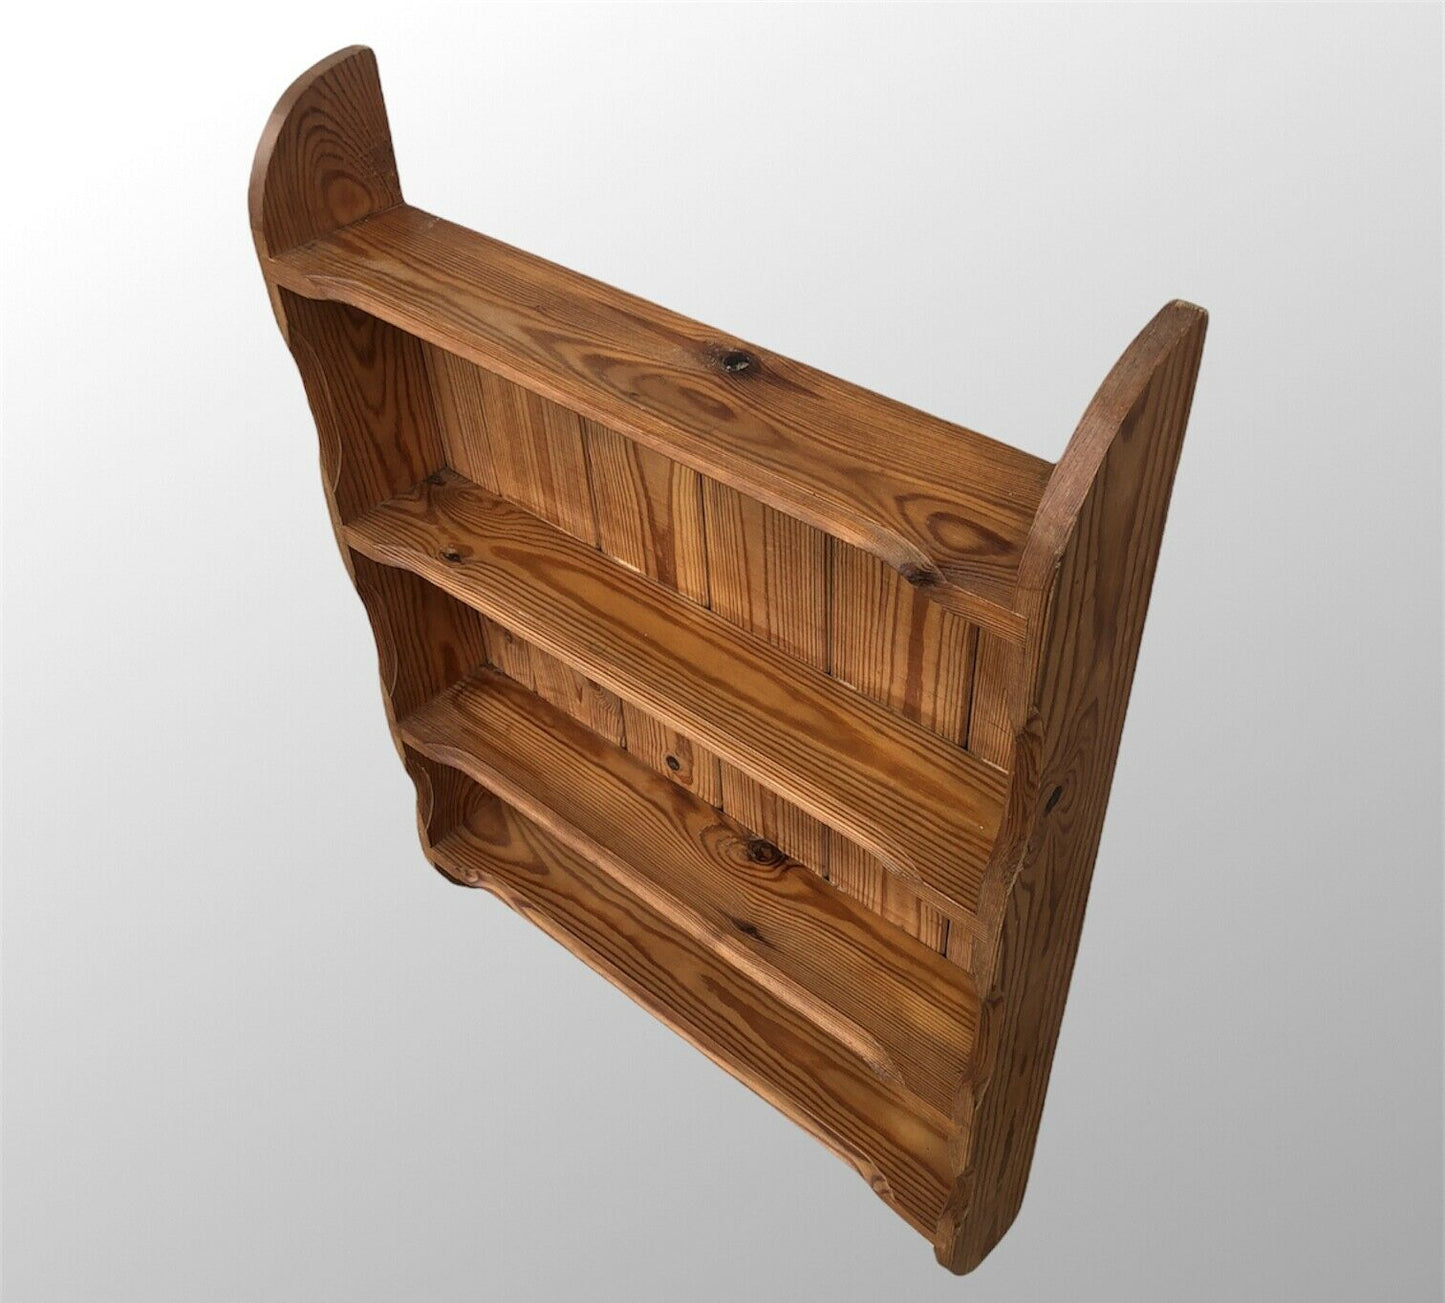 057.....A Set Of Vintage Pine Wall Shelves / Bookcase ( sold )